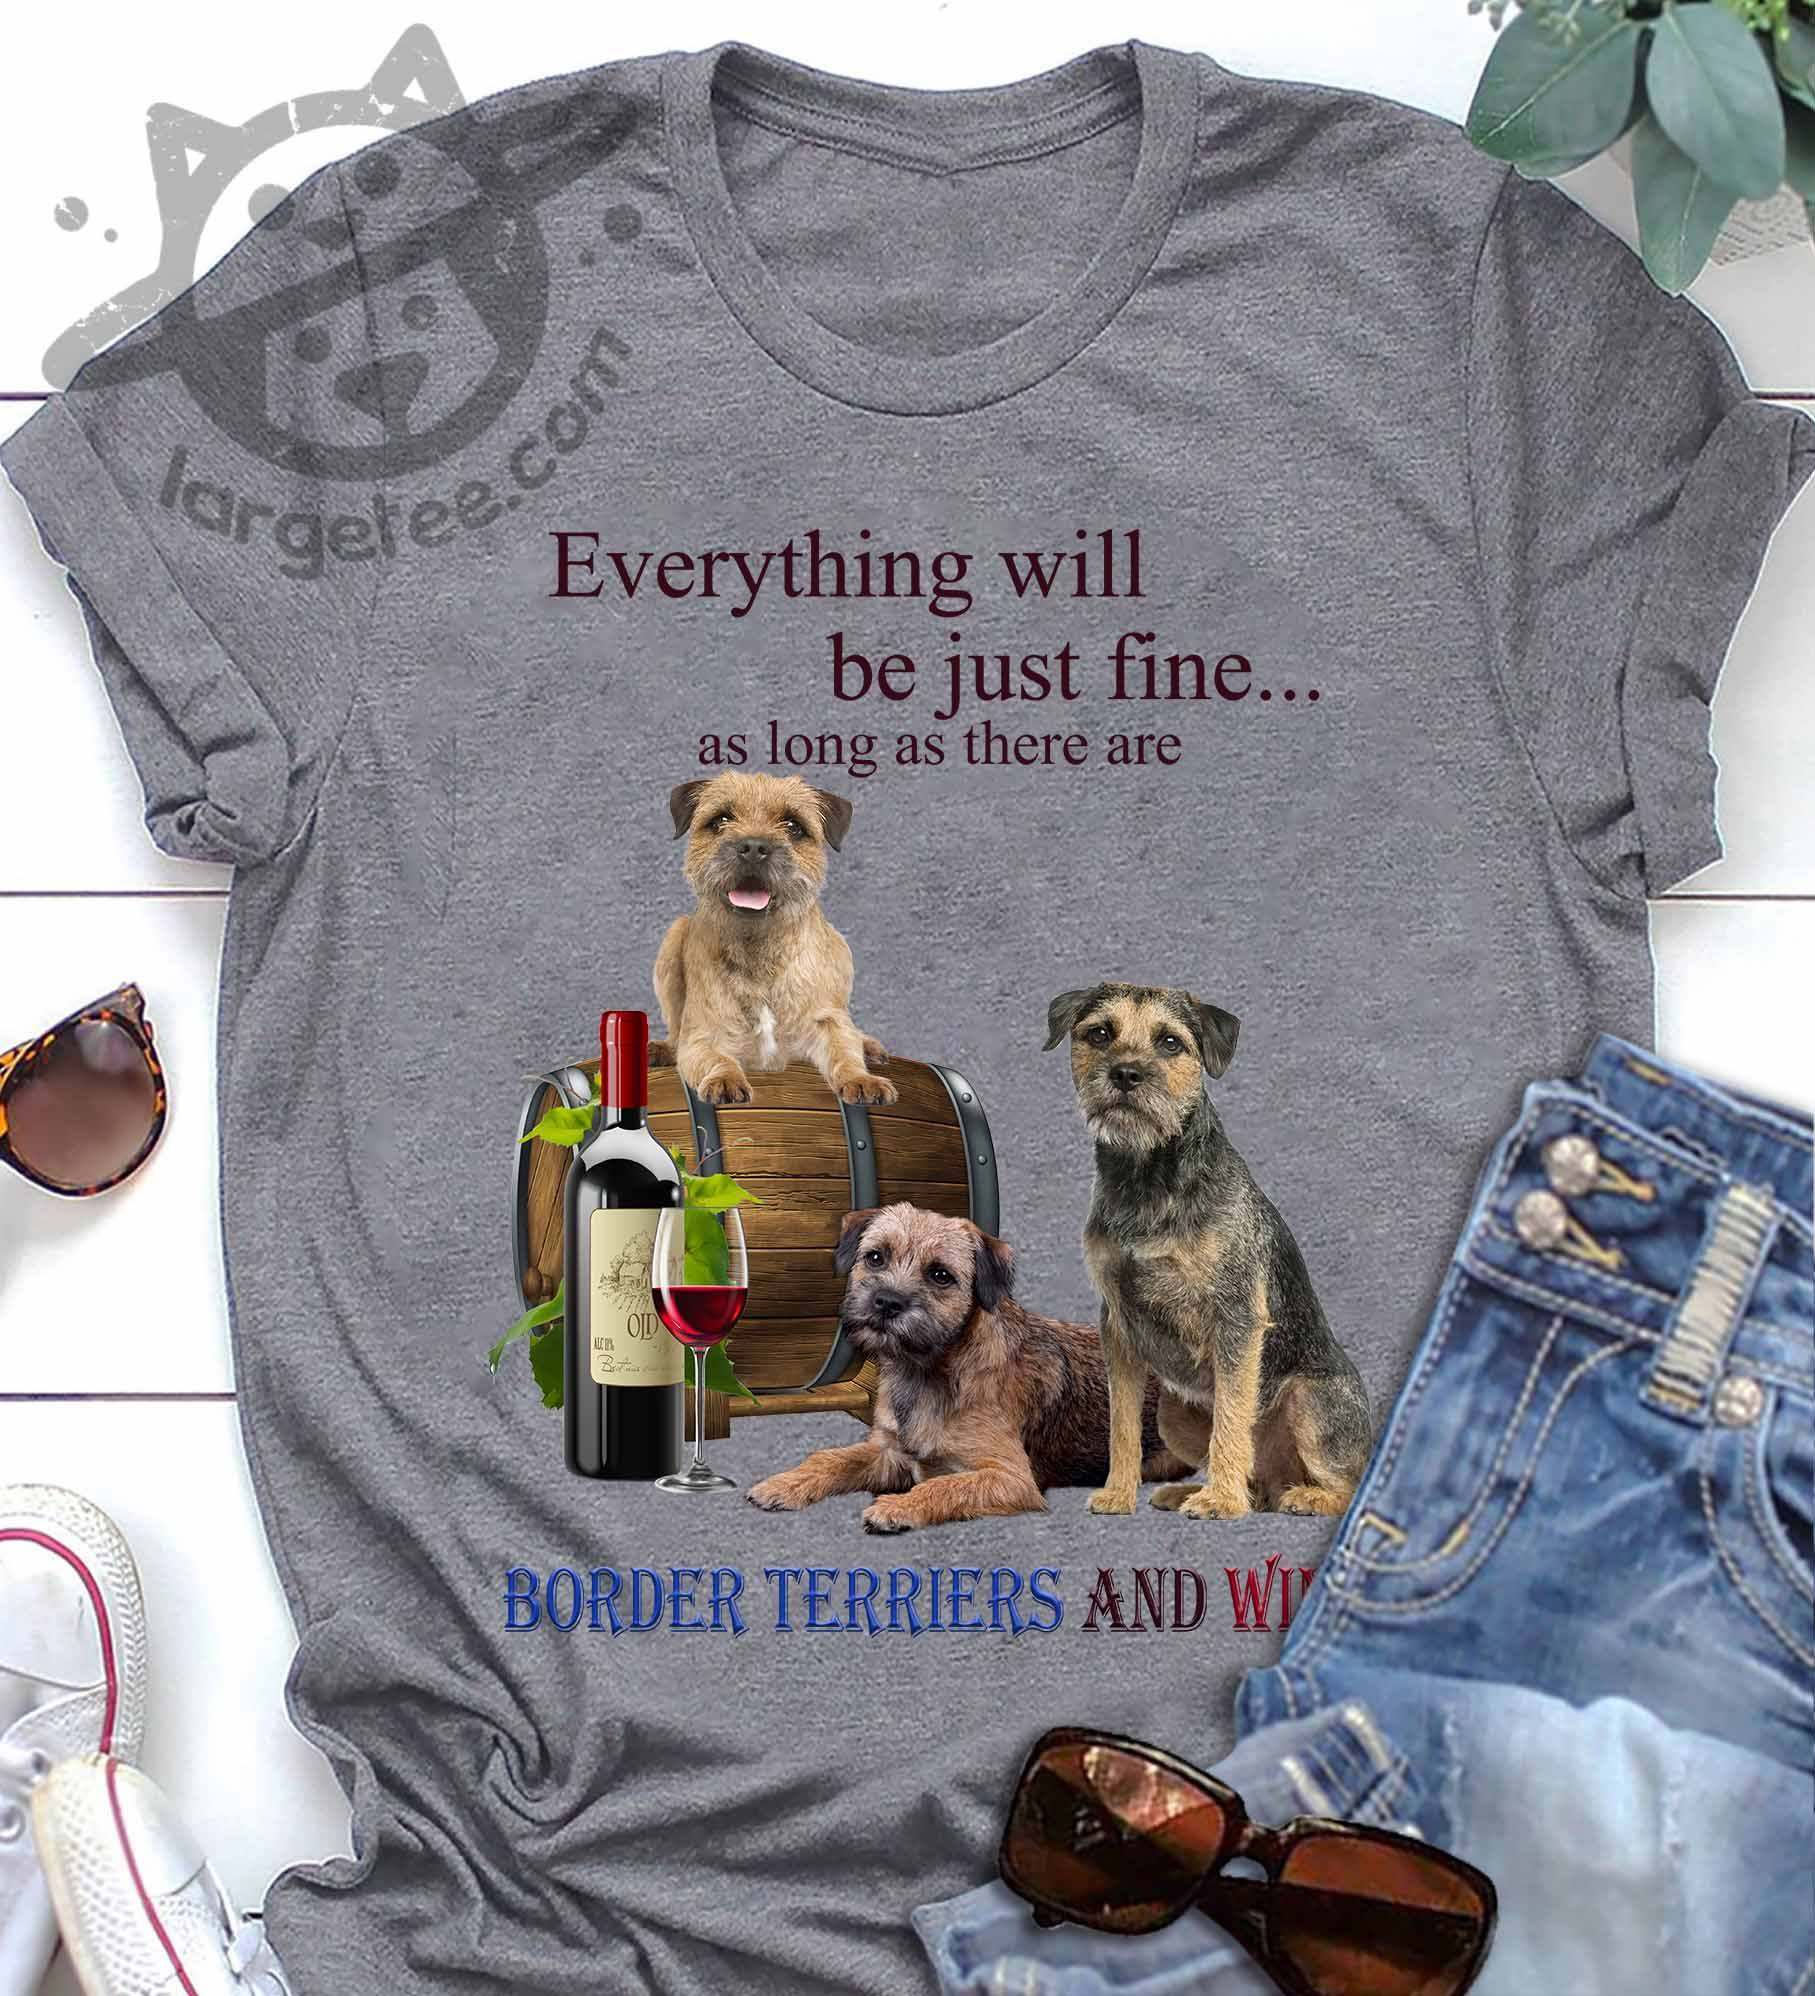 Everything will be just fine as long as there are Border Terriers and wine